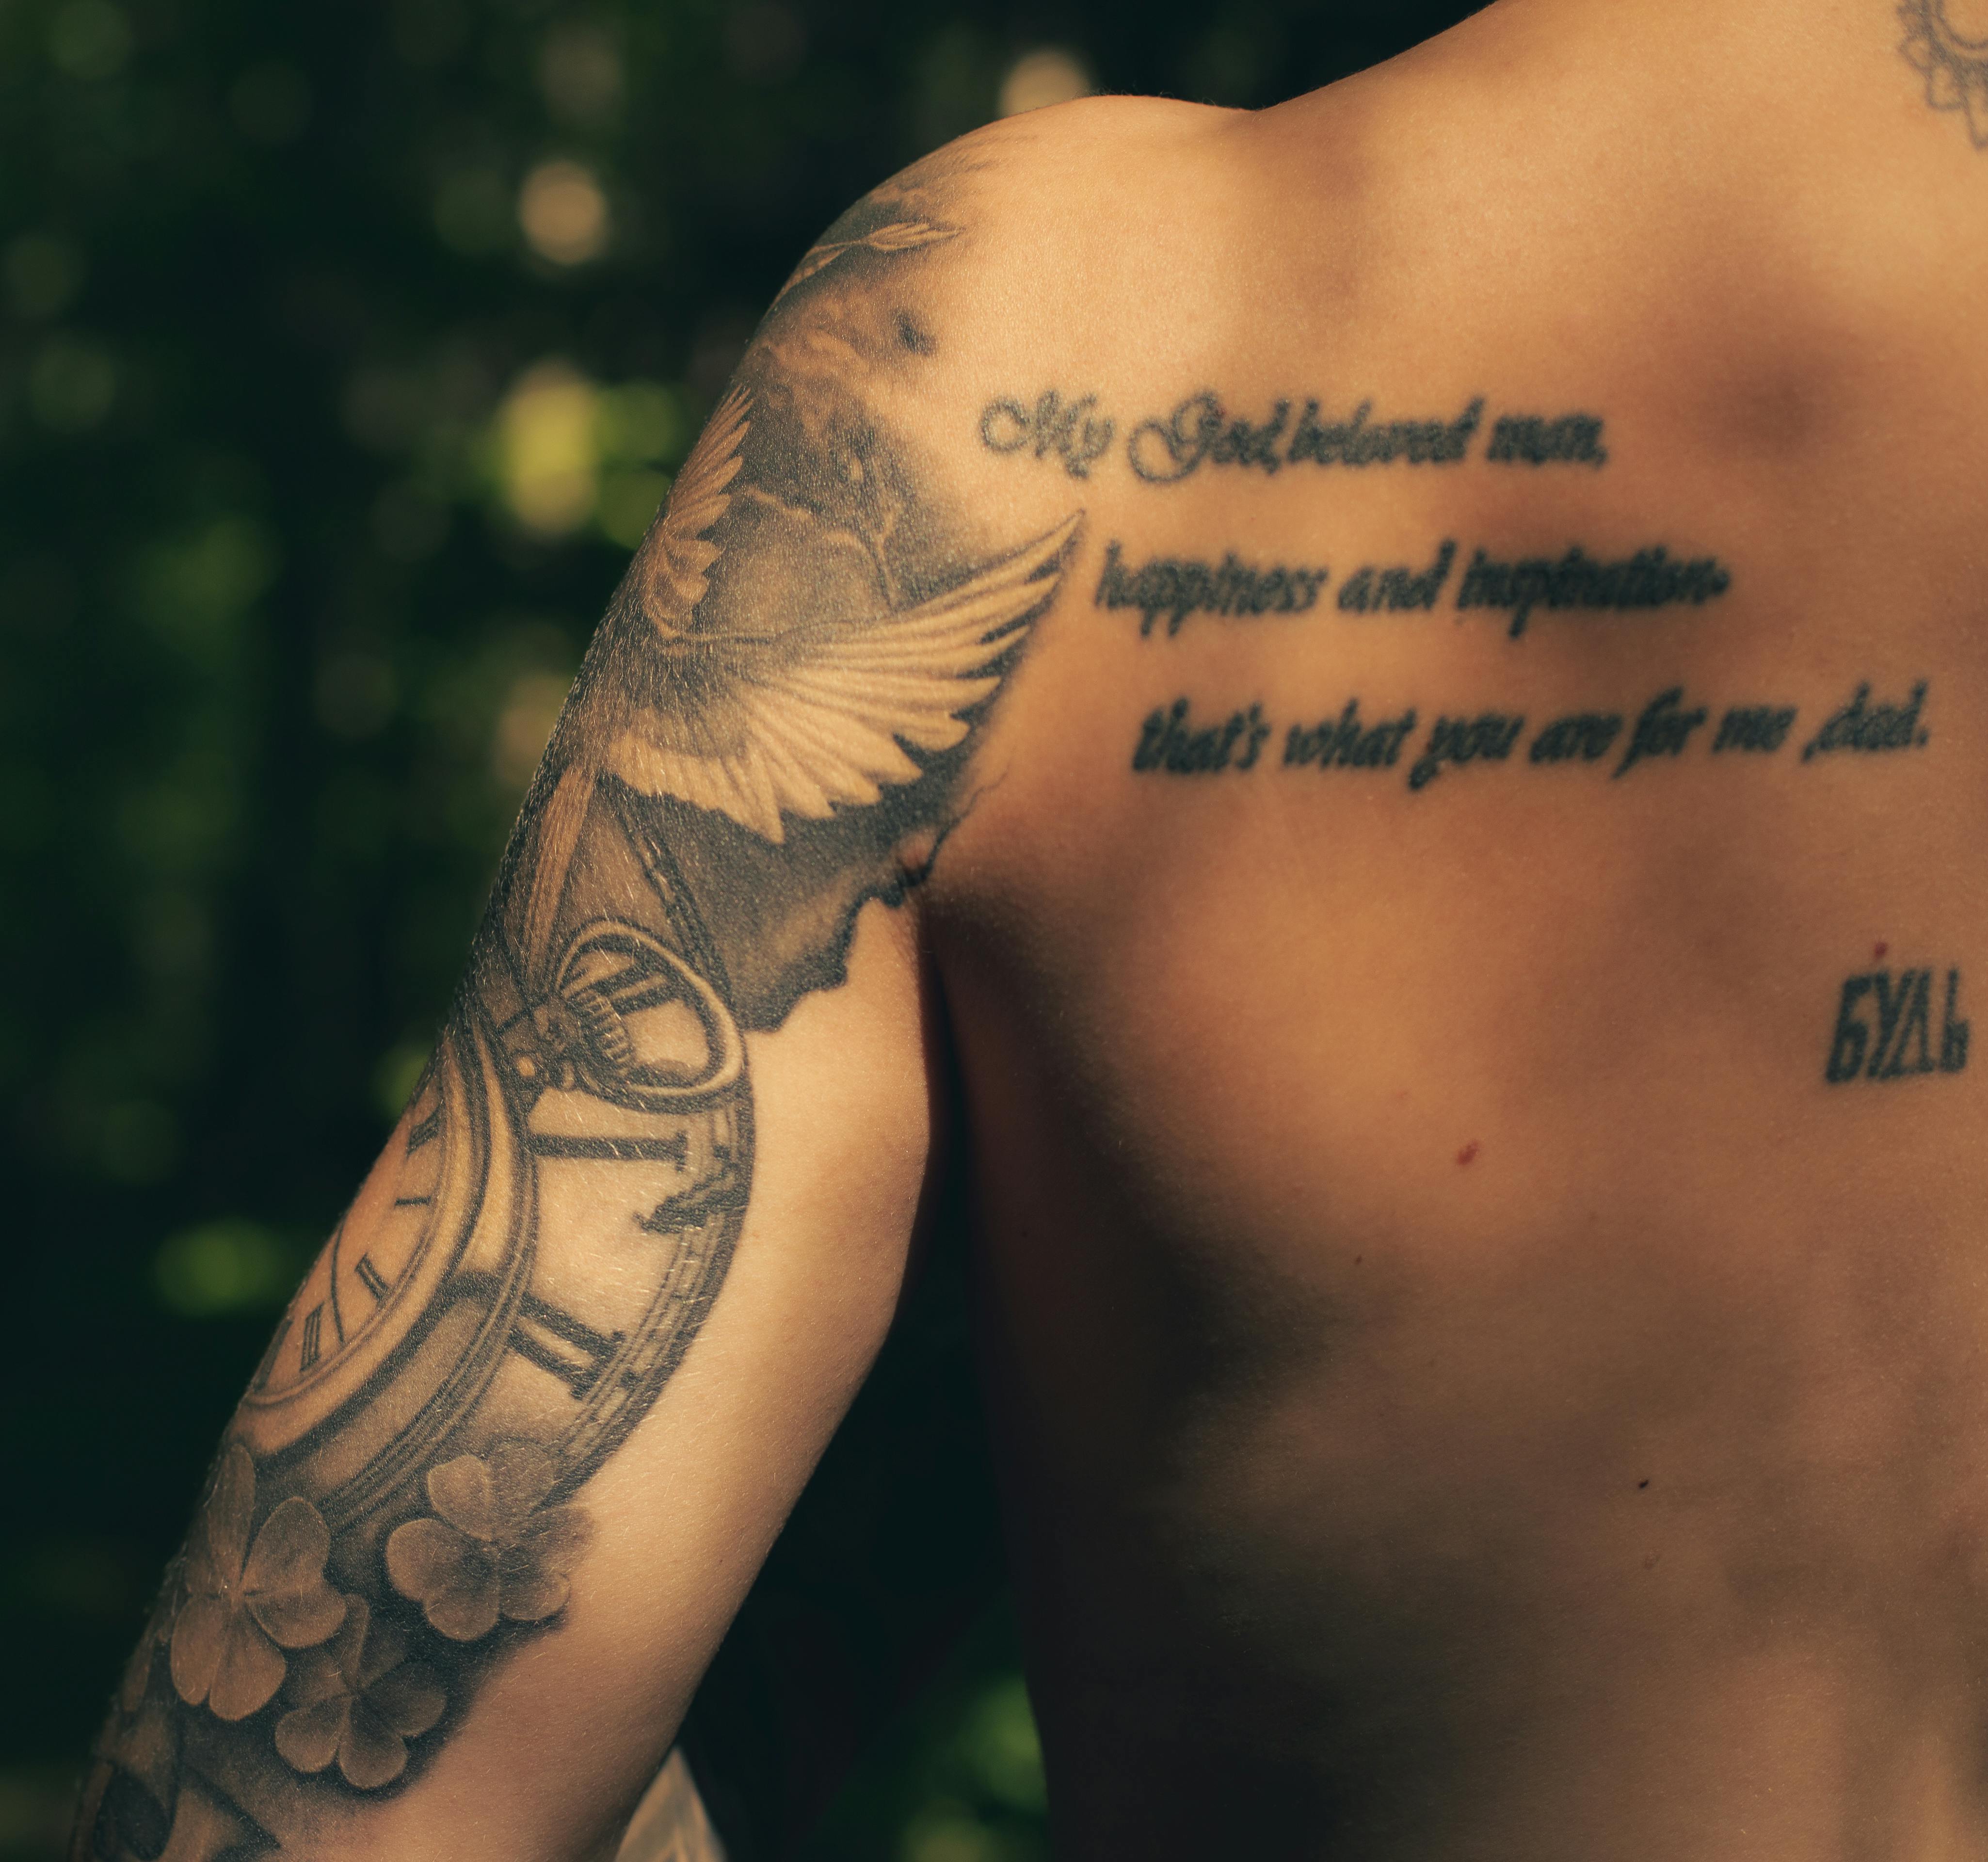 Quote tattoo | Meaningful tattoo - YouTube